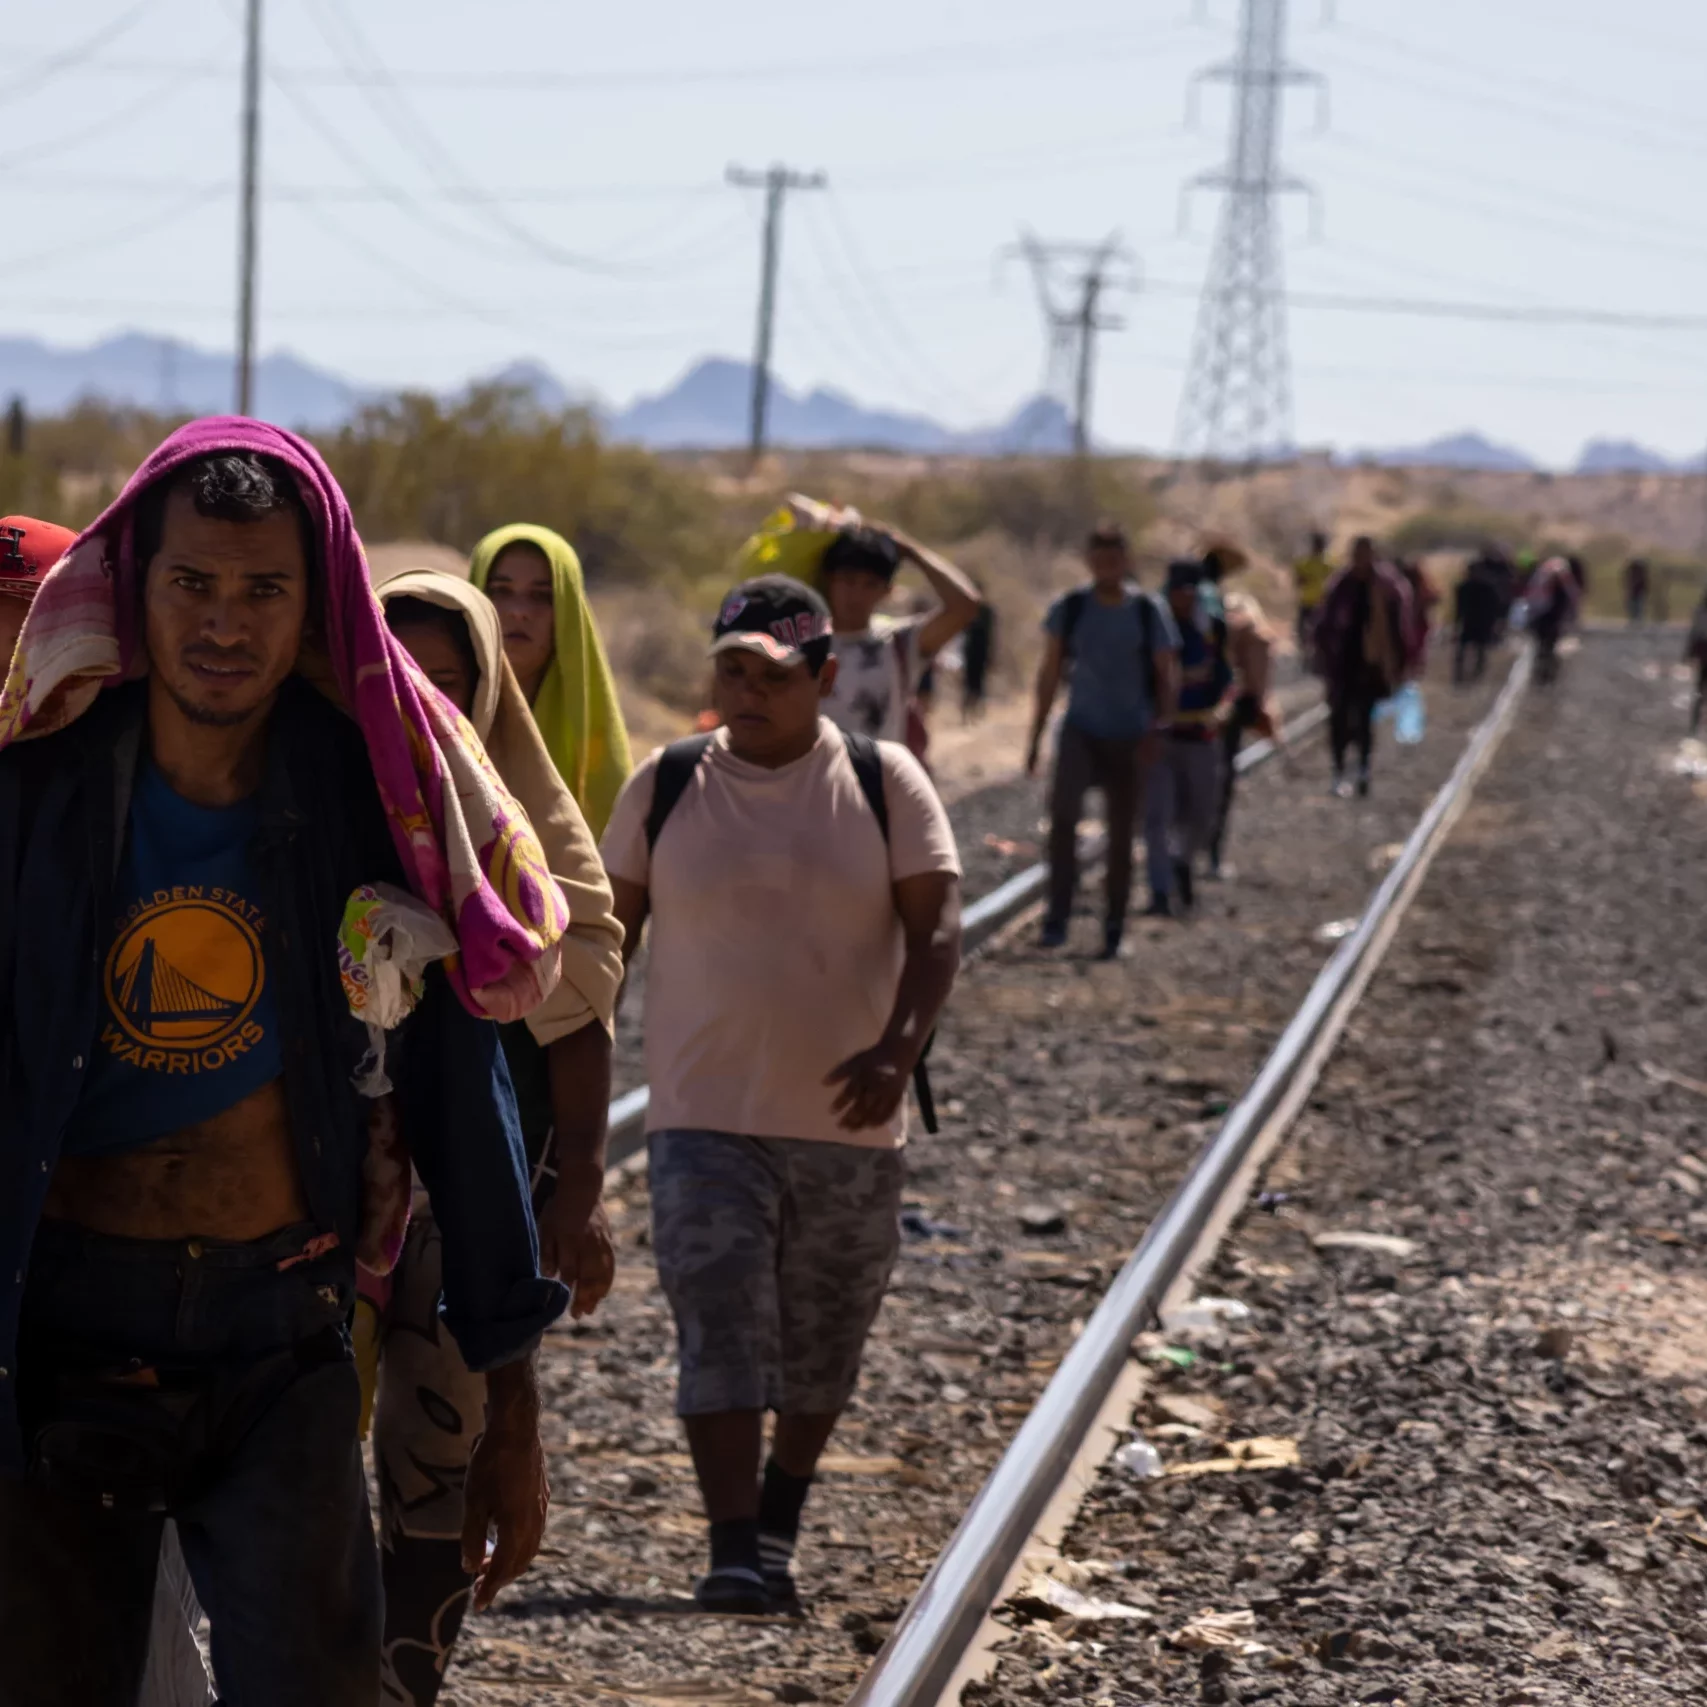 Migrants Walk Alongside the Railroad Tracks After Dismounting from the 'La Bestia' Train, Which They Rode Through Mexico to Reach the Mexico-U.S. Border - Chihuahua, Mexico